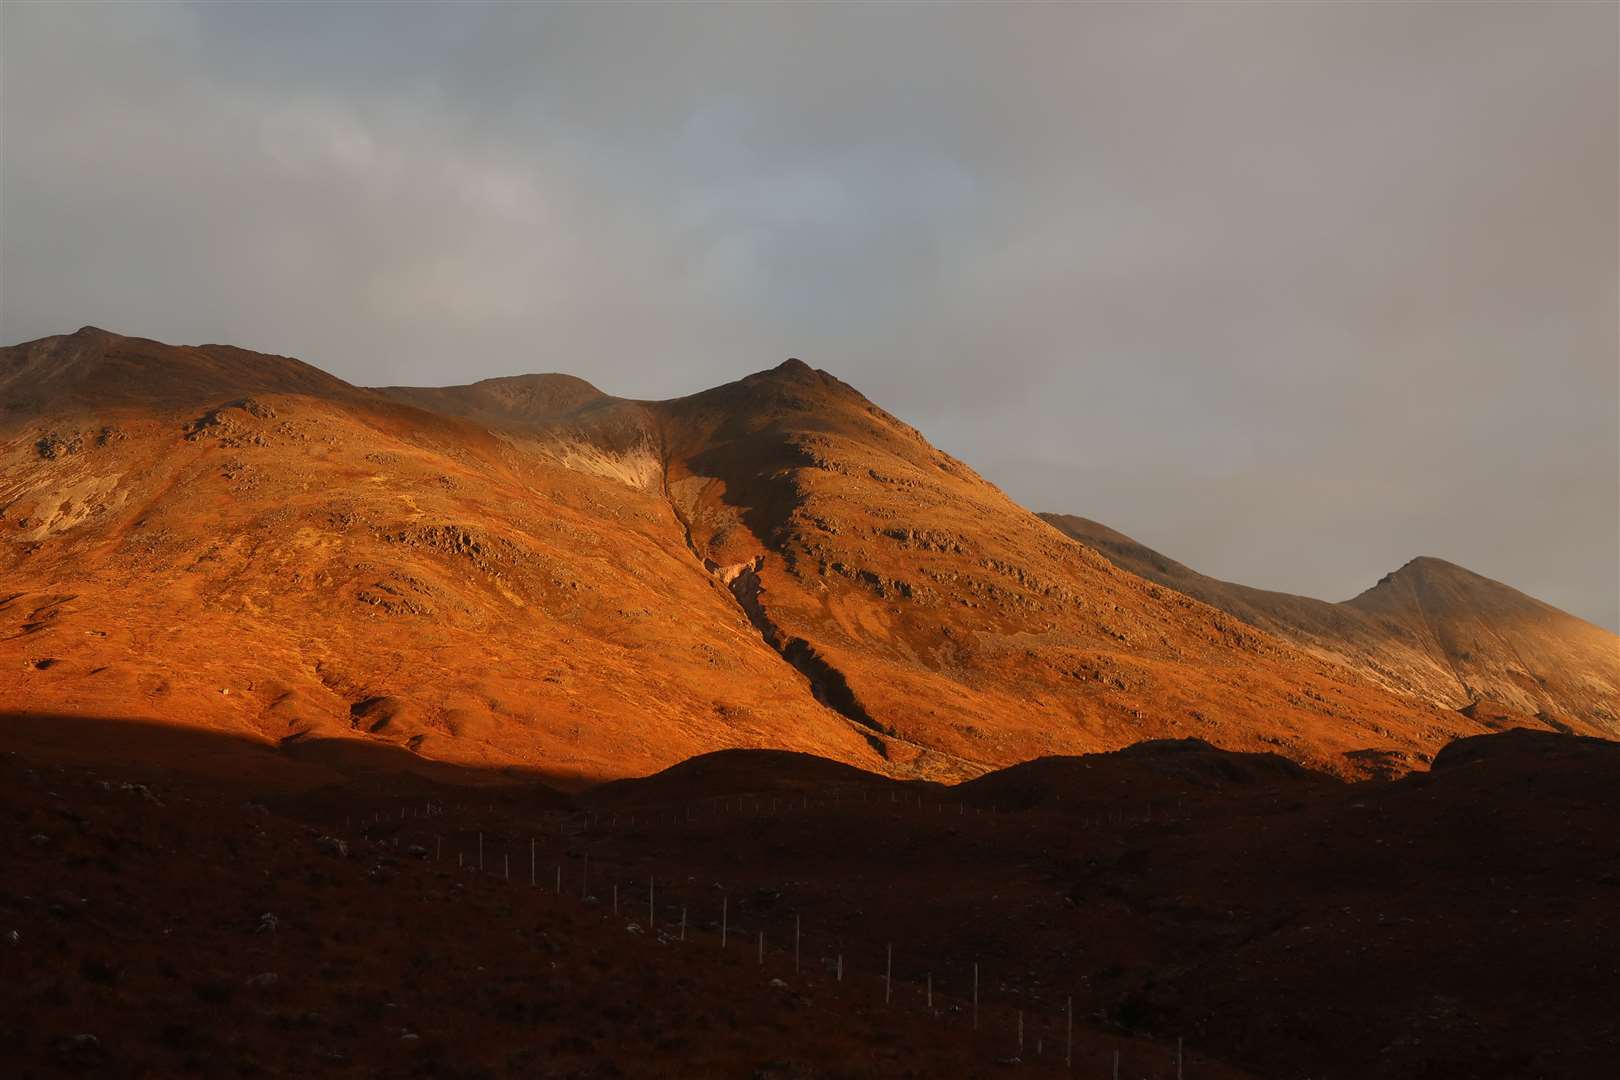 Looking up to Spidean Coire nan Clach on the Beinn Eighe ridge in the early morning sunlight.